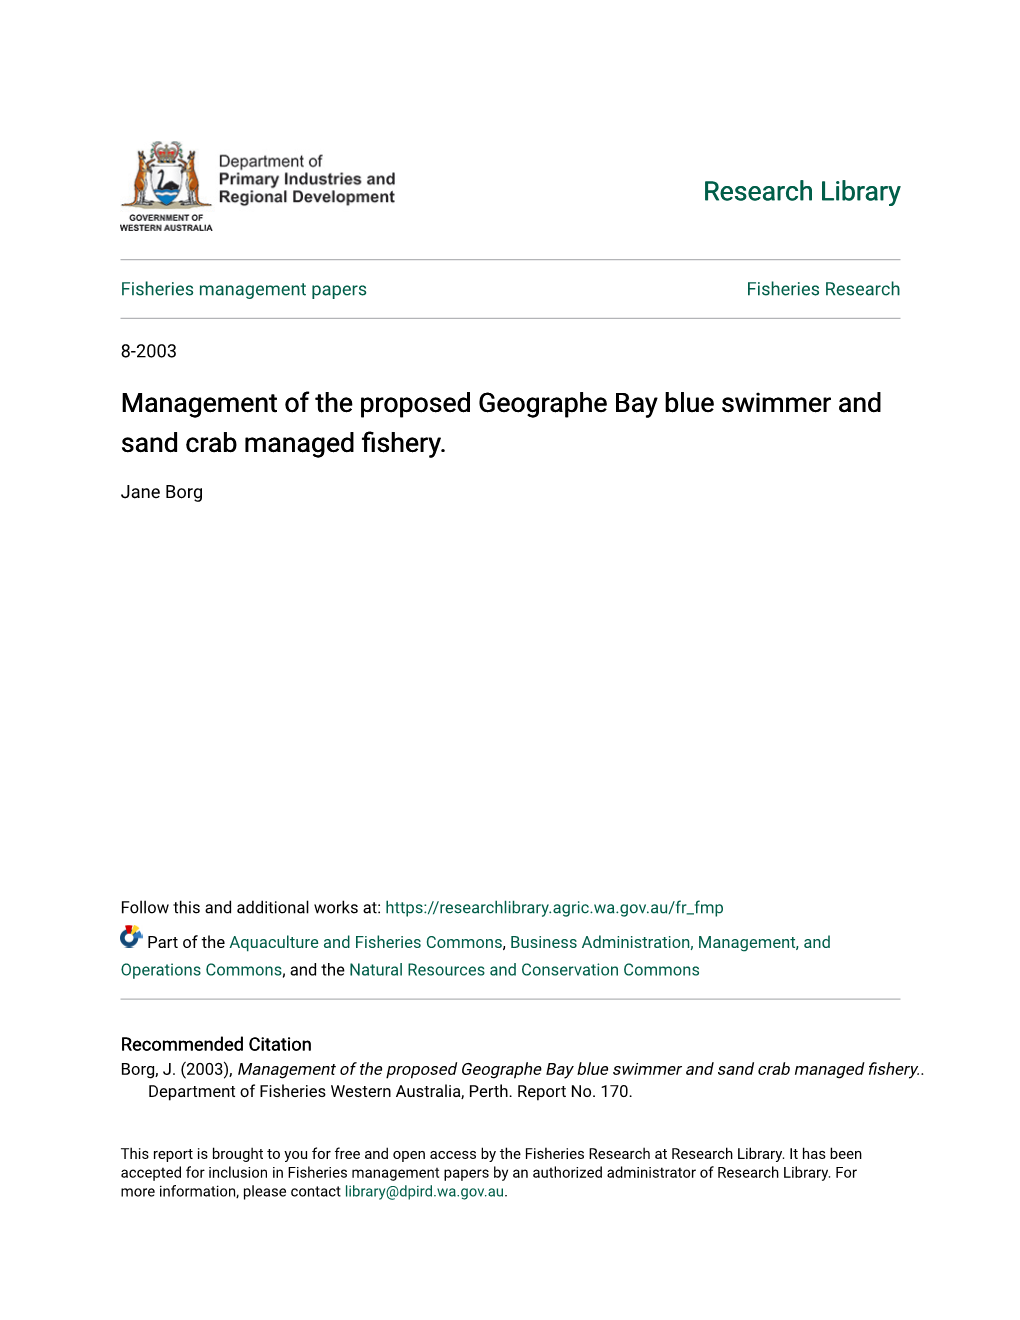 Management of the Proposed Geographe Bay Blue Swimmer and Sand Crab Managed Fishery